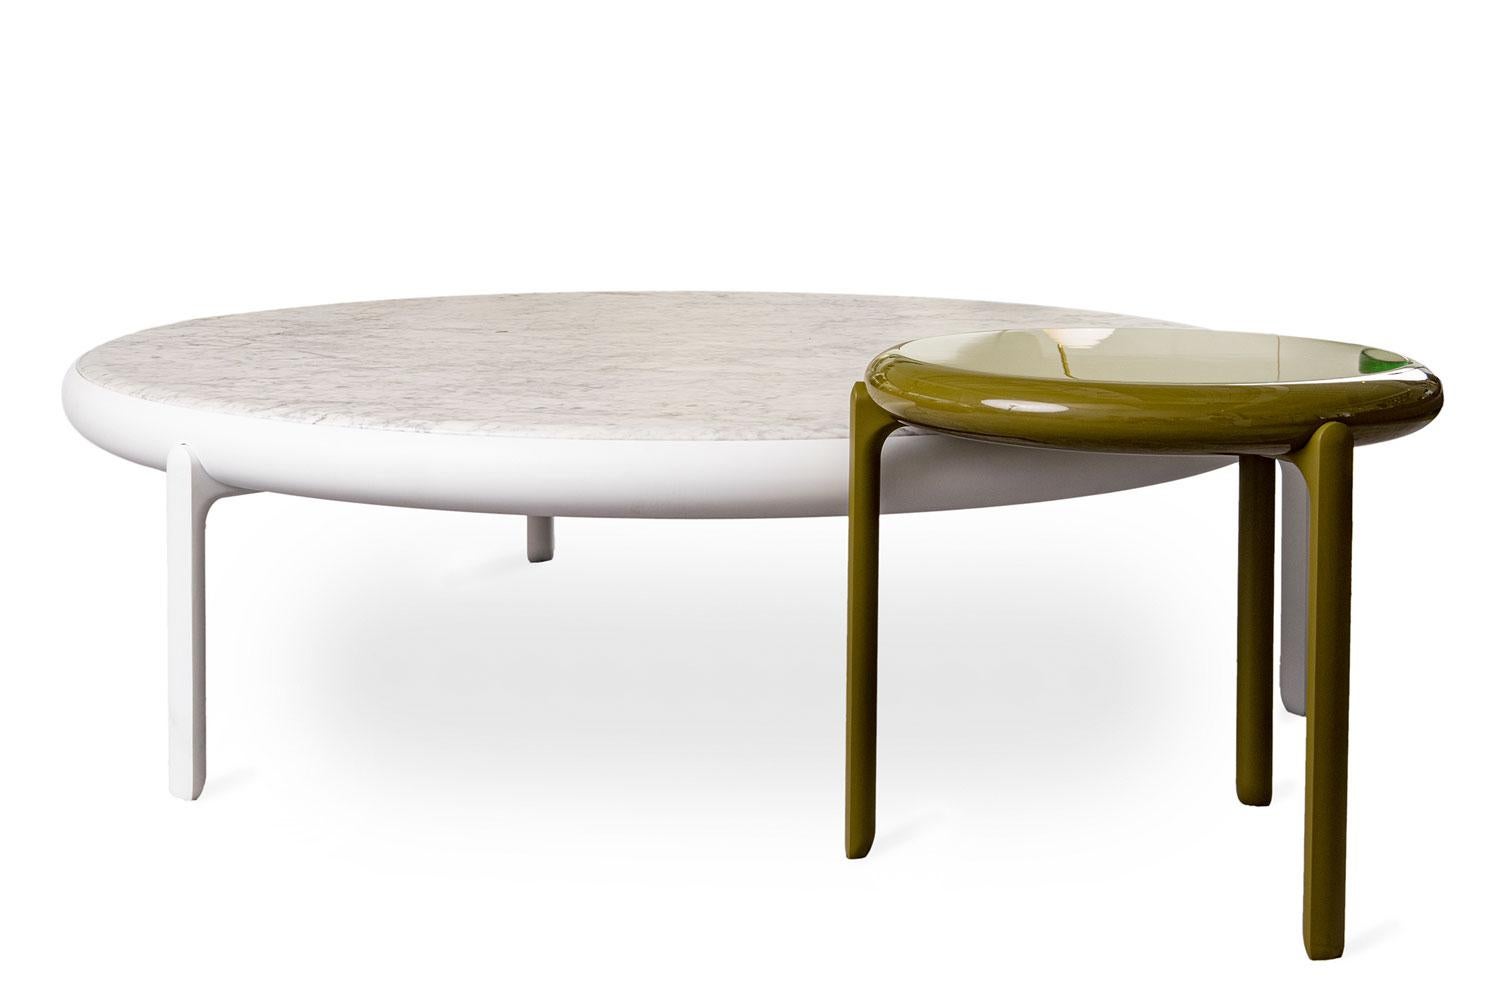 Italian Olive Glossy Lacquer Top Round Coffee Table by B&B Italia - Available Now 